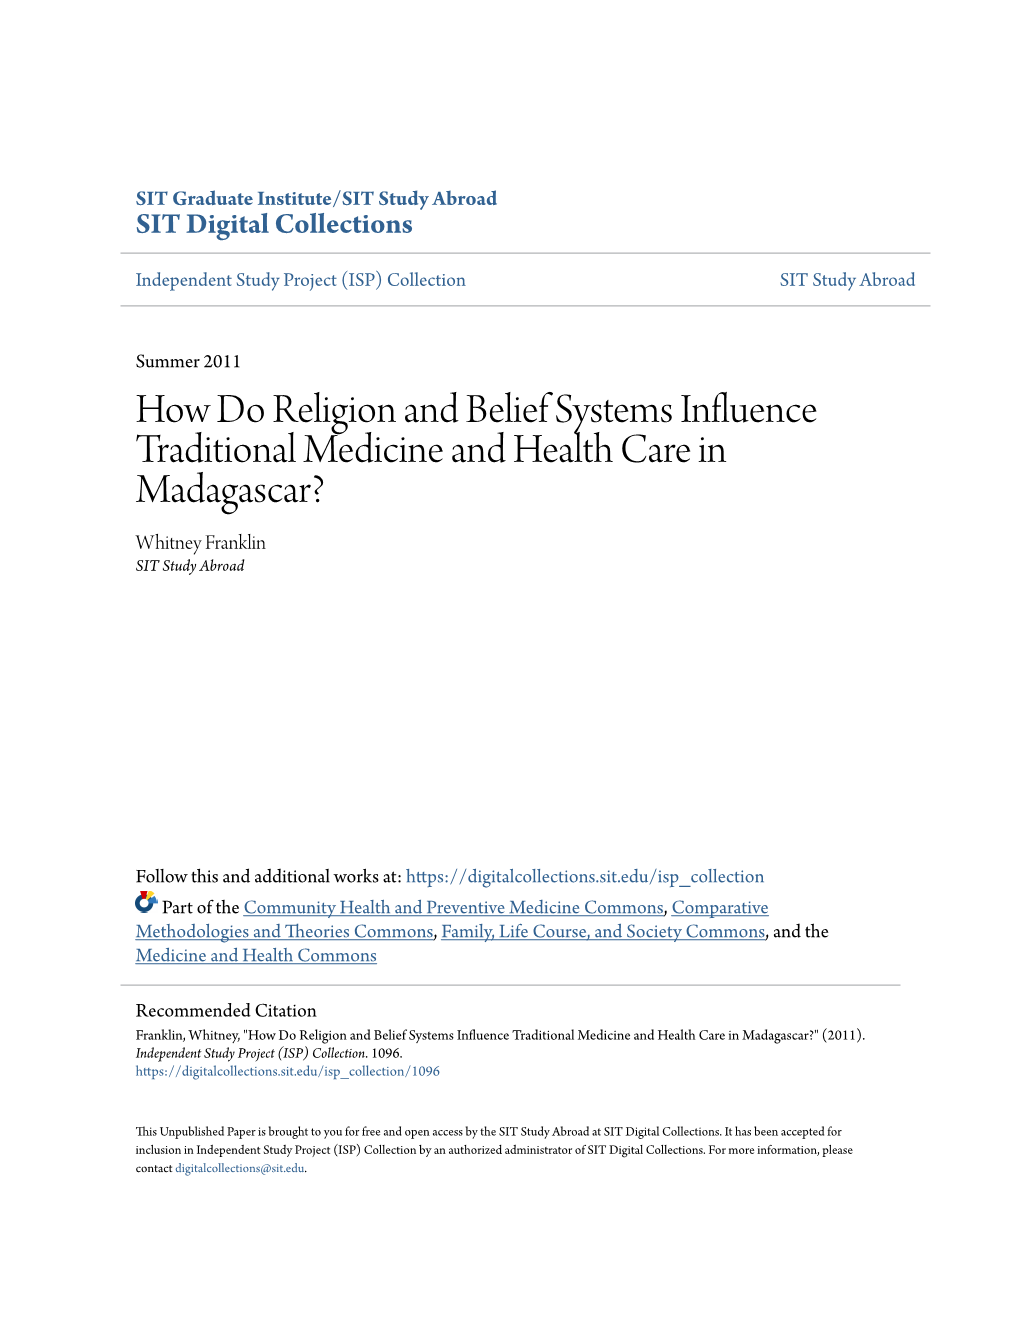 How Do Religion and Belief Systems Influence Traditional Medicine and Health Care in Madagascar? Whitney Franklin SIT Study Abroad